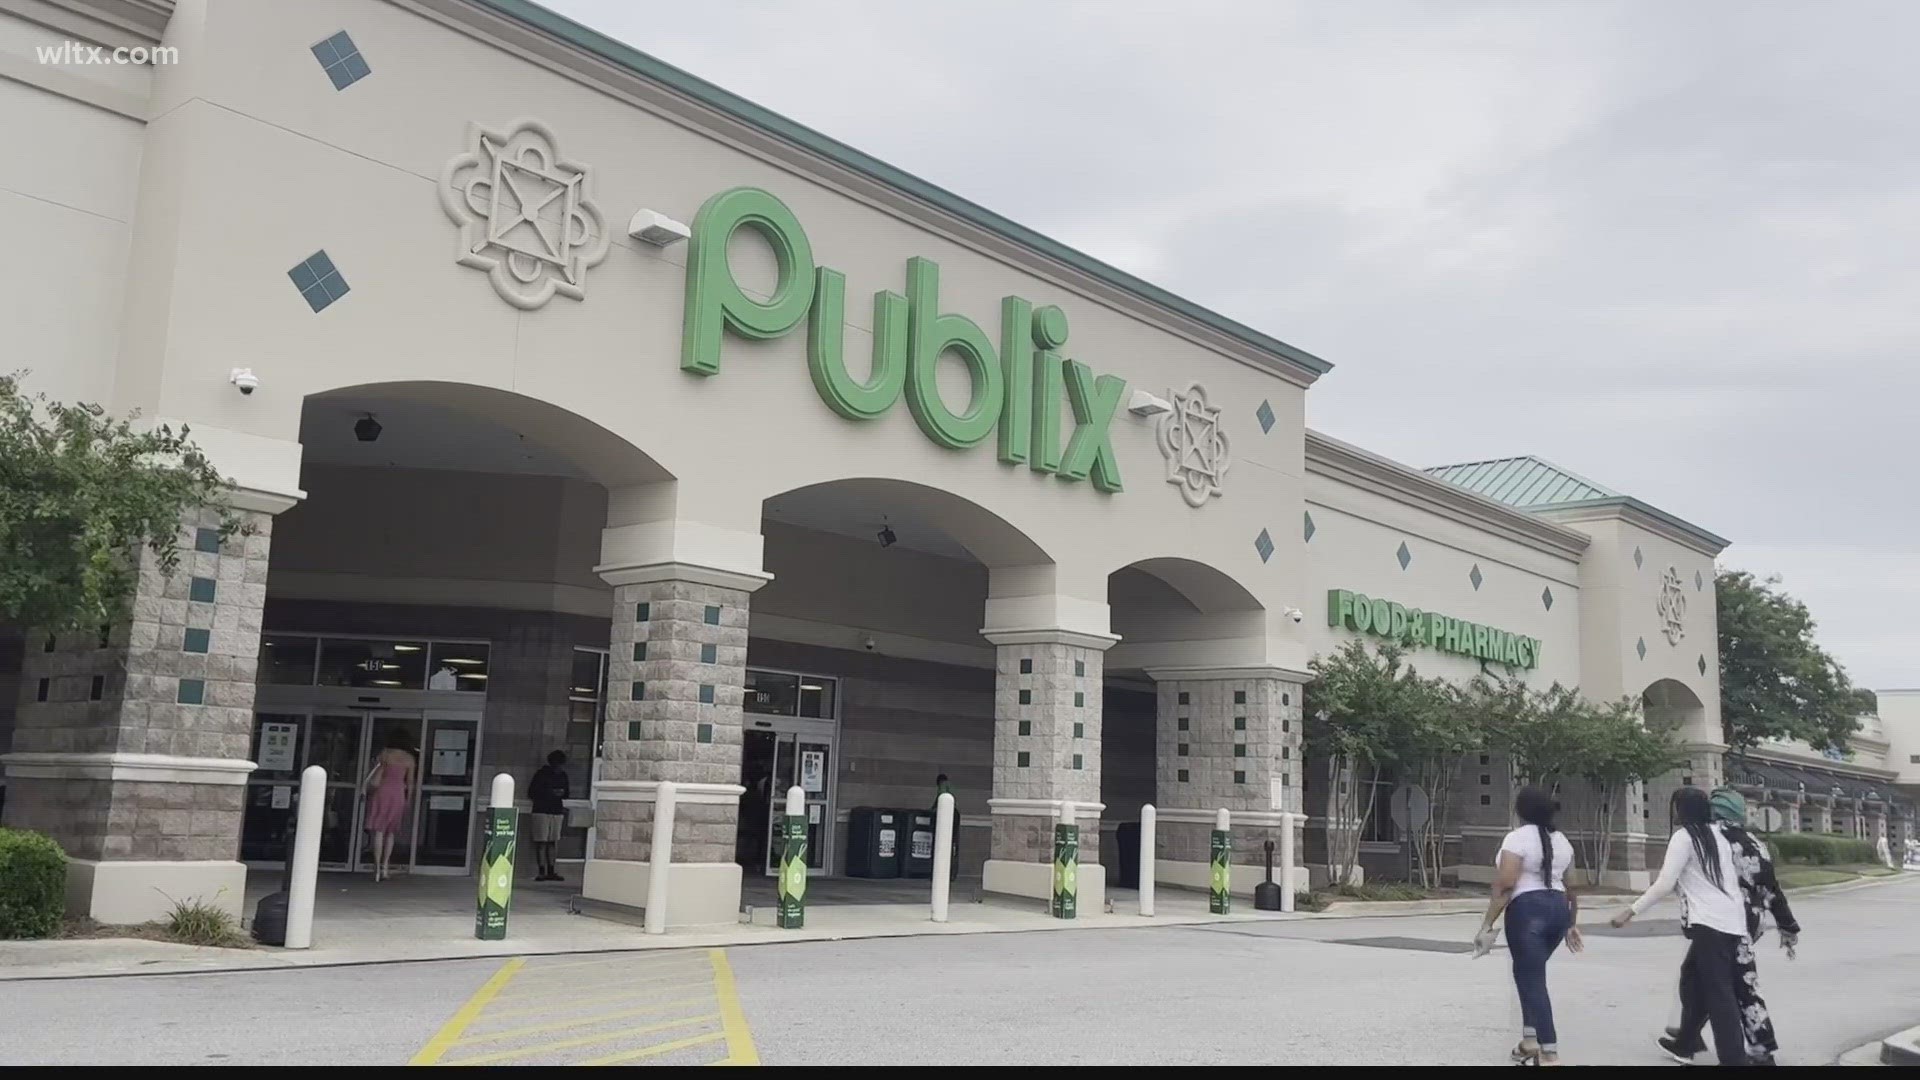 Half a dozen workers at a Publix grocery store in Columbia went on strike today.